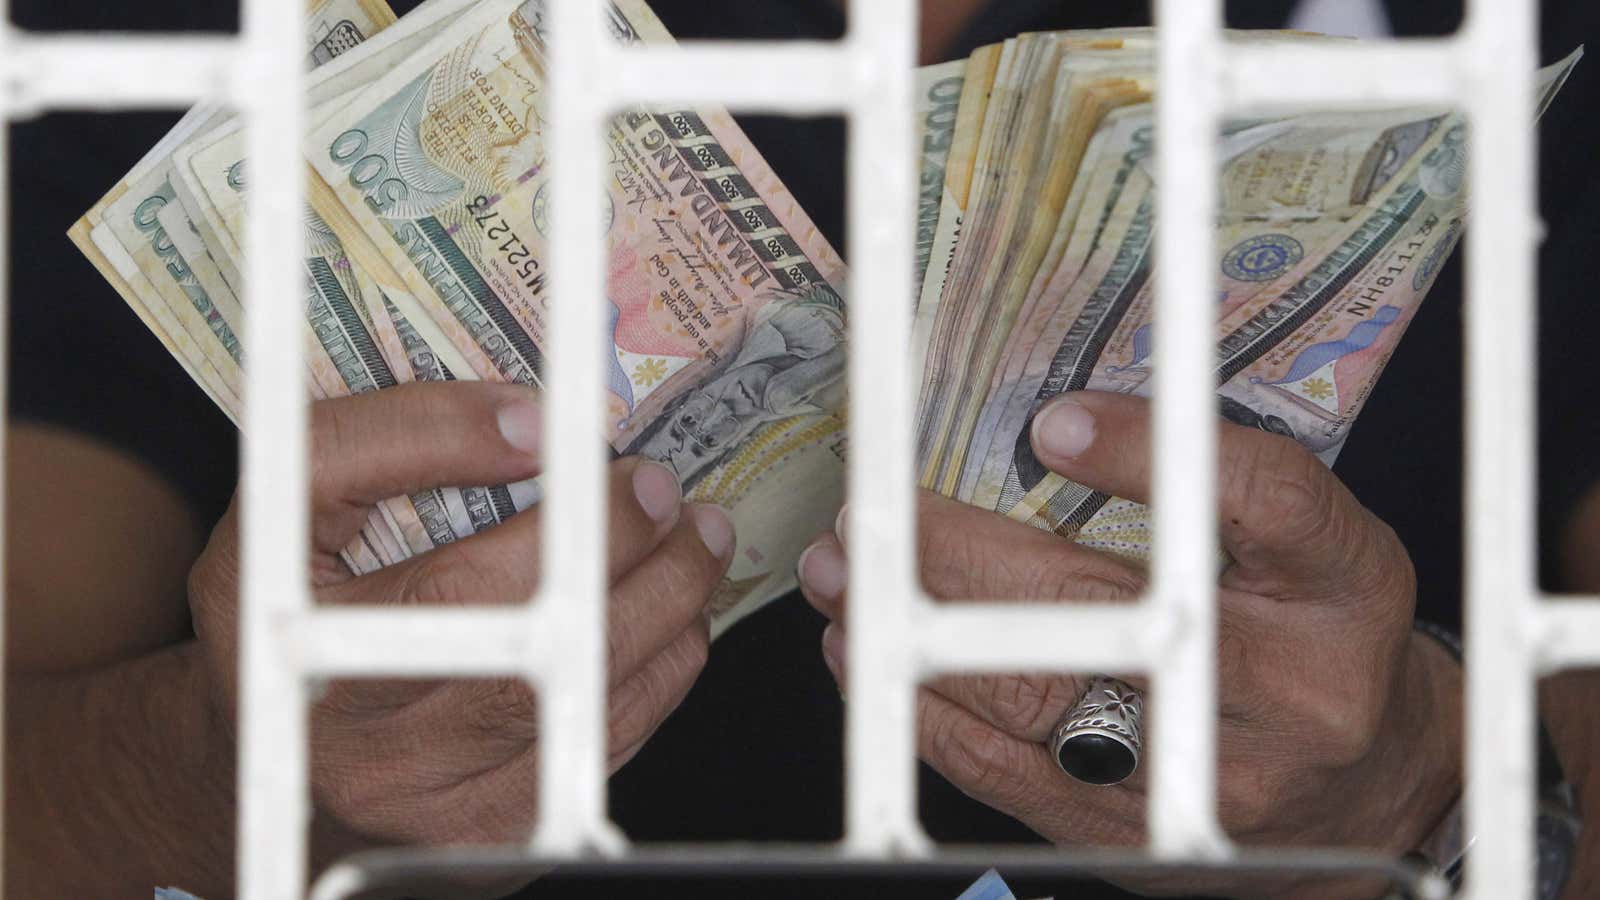 The more fake trade invoicing, the bigger the Philippines’ currency black market.